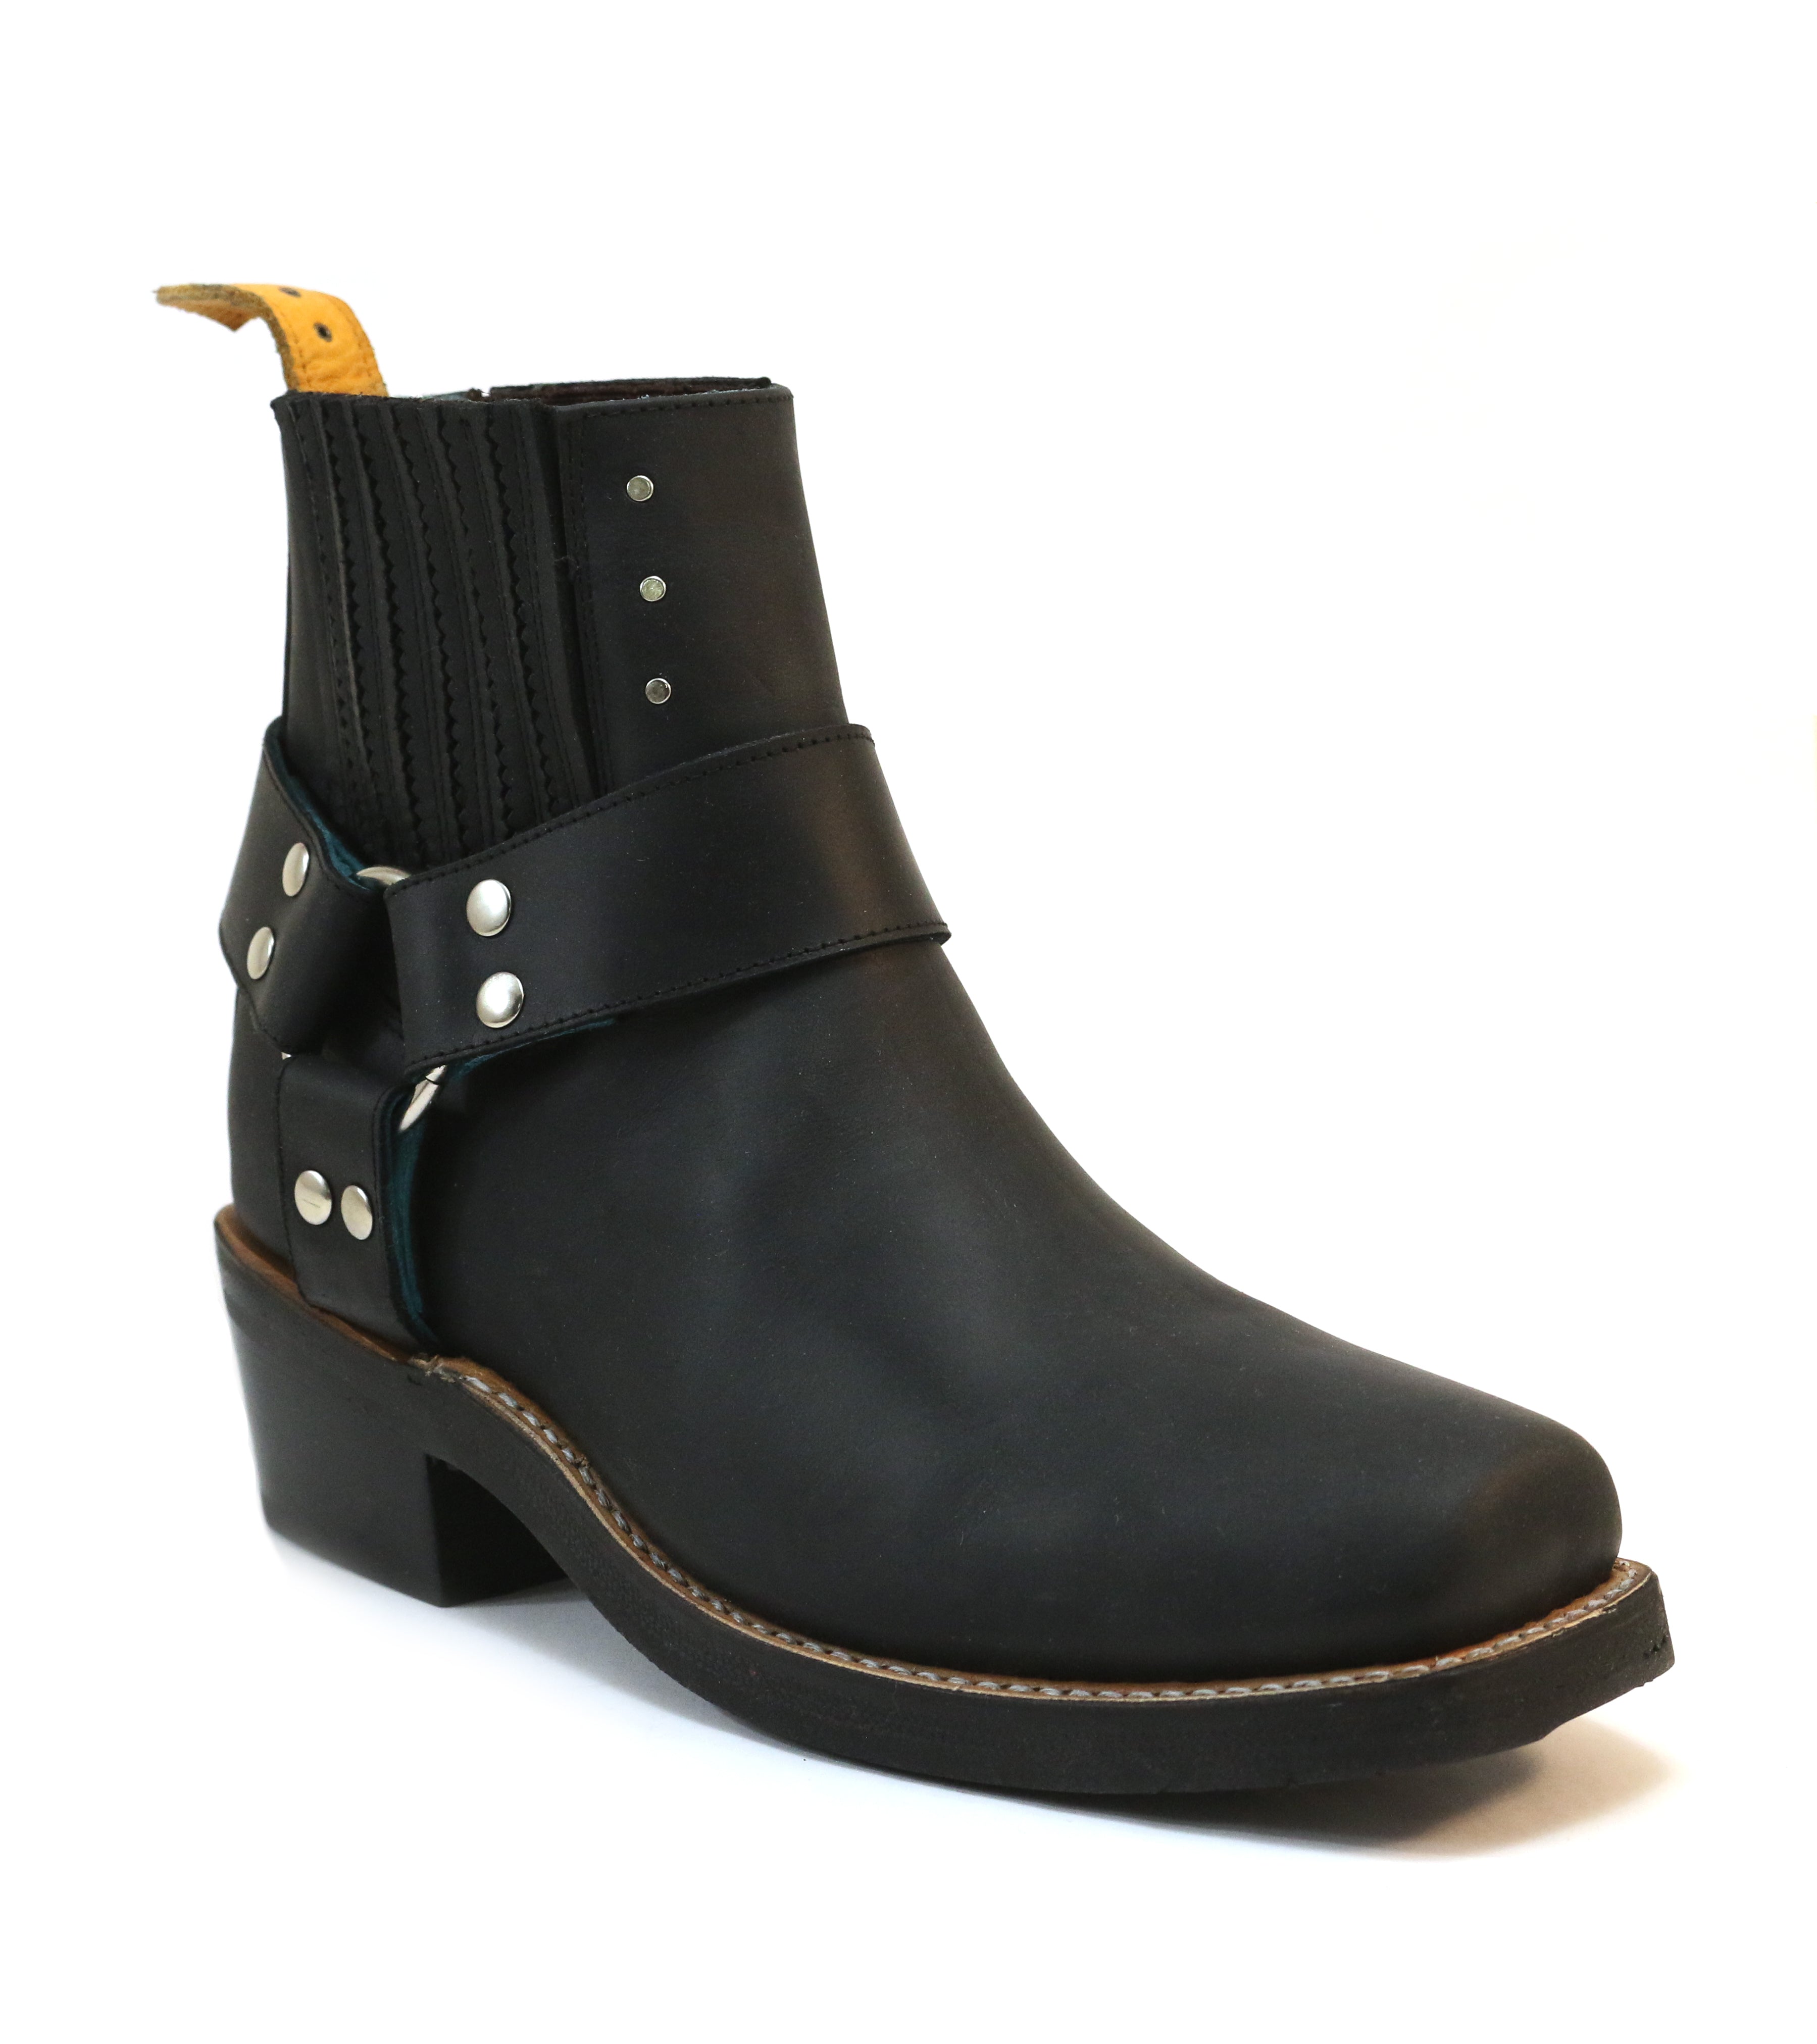 No.2037 OFFROAD ankle harness boot Black Oiled Leather